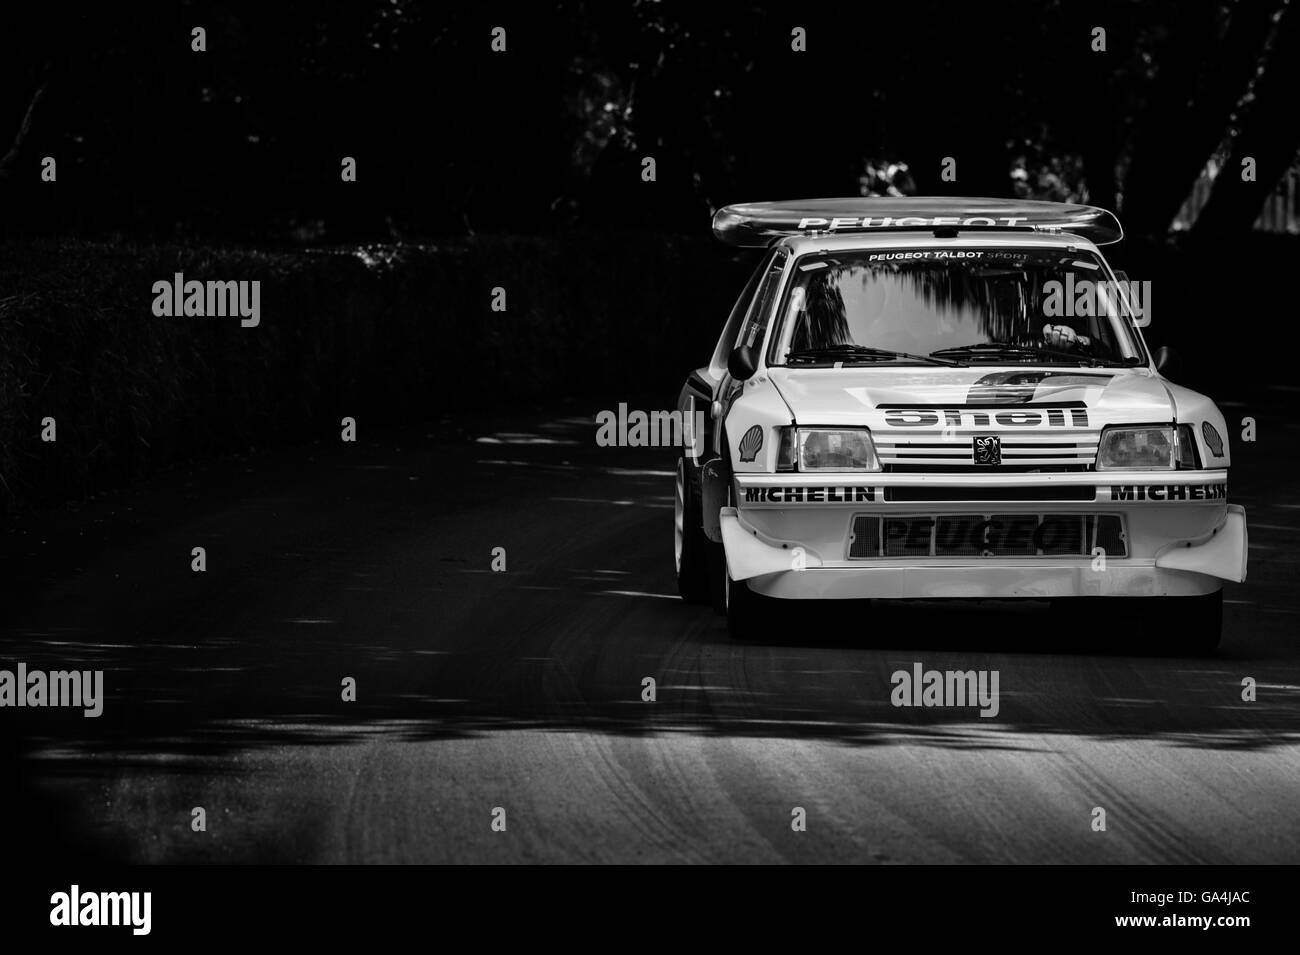 Peugeot Group B rally car 205 T16 drives up the hill at the Goodwood Festival of Speed 2016 Stock Photo